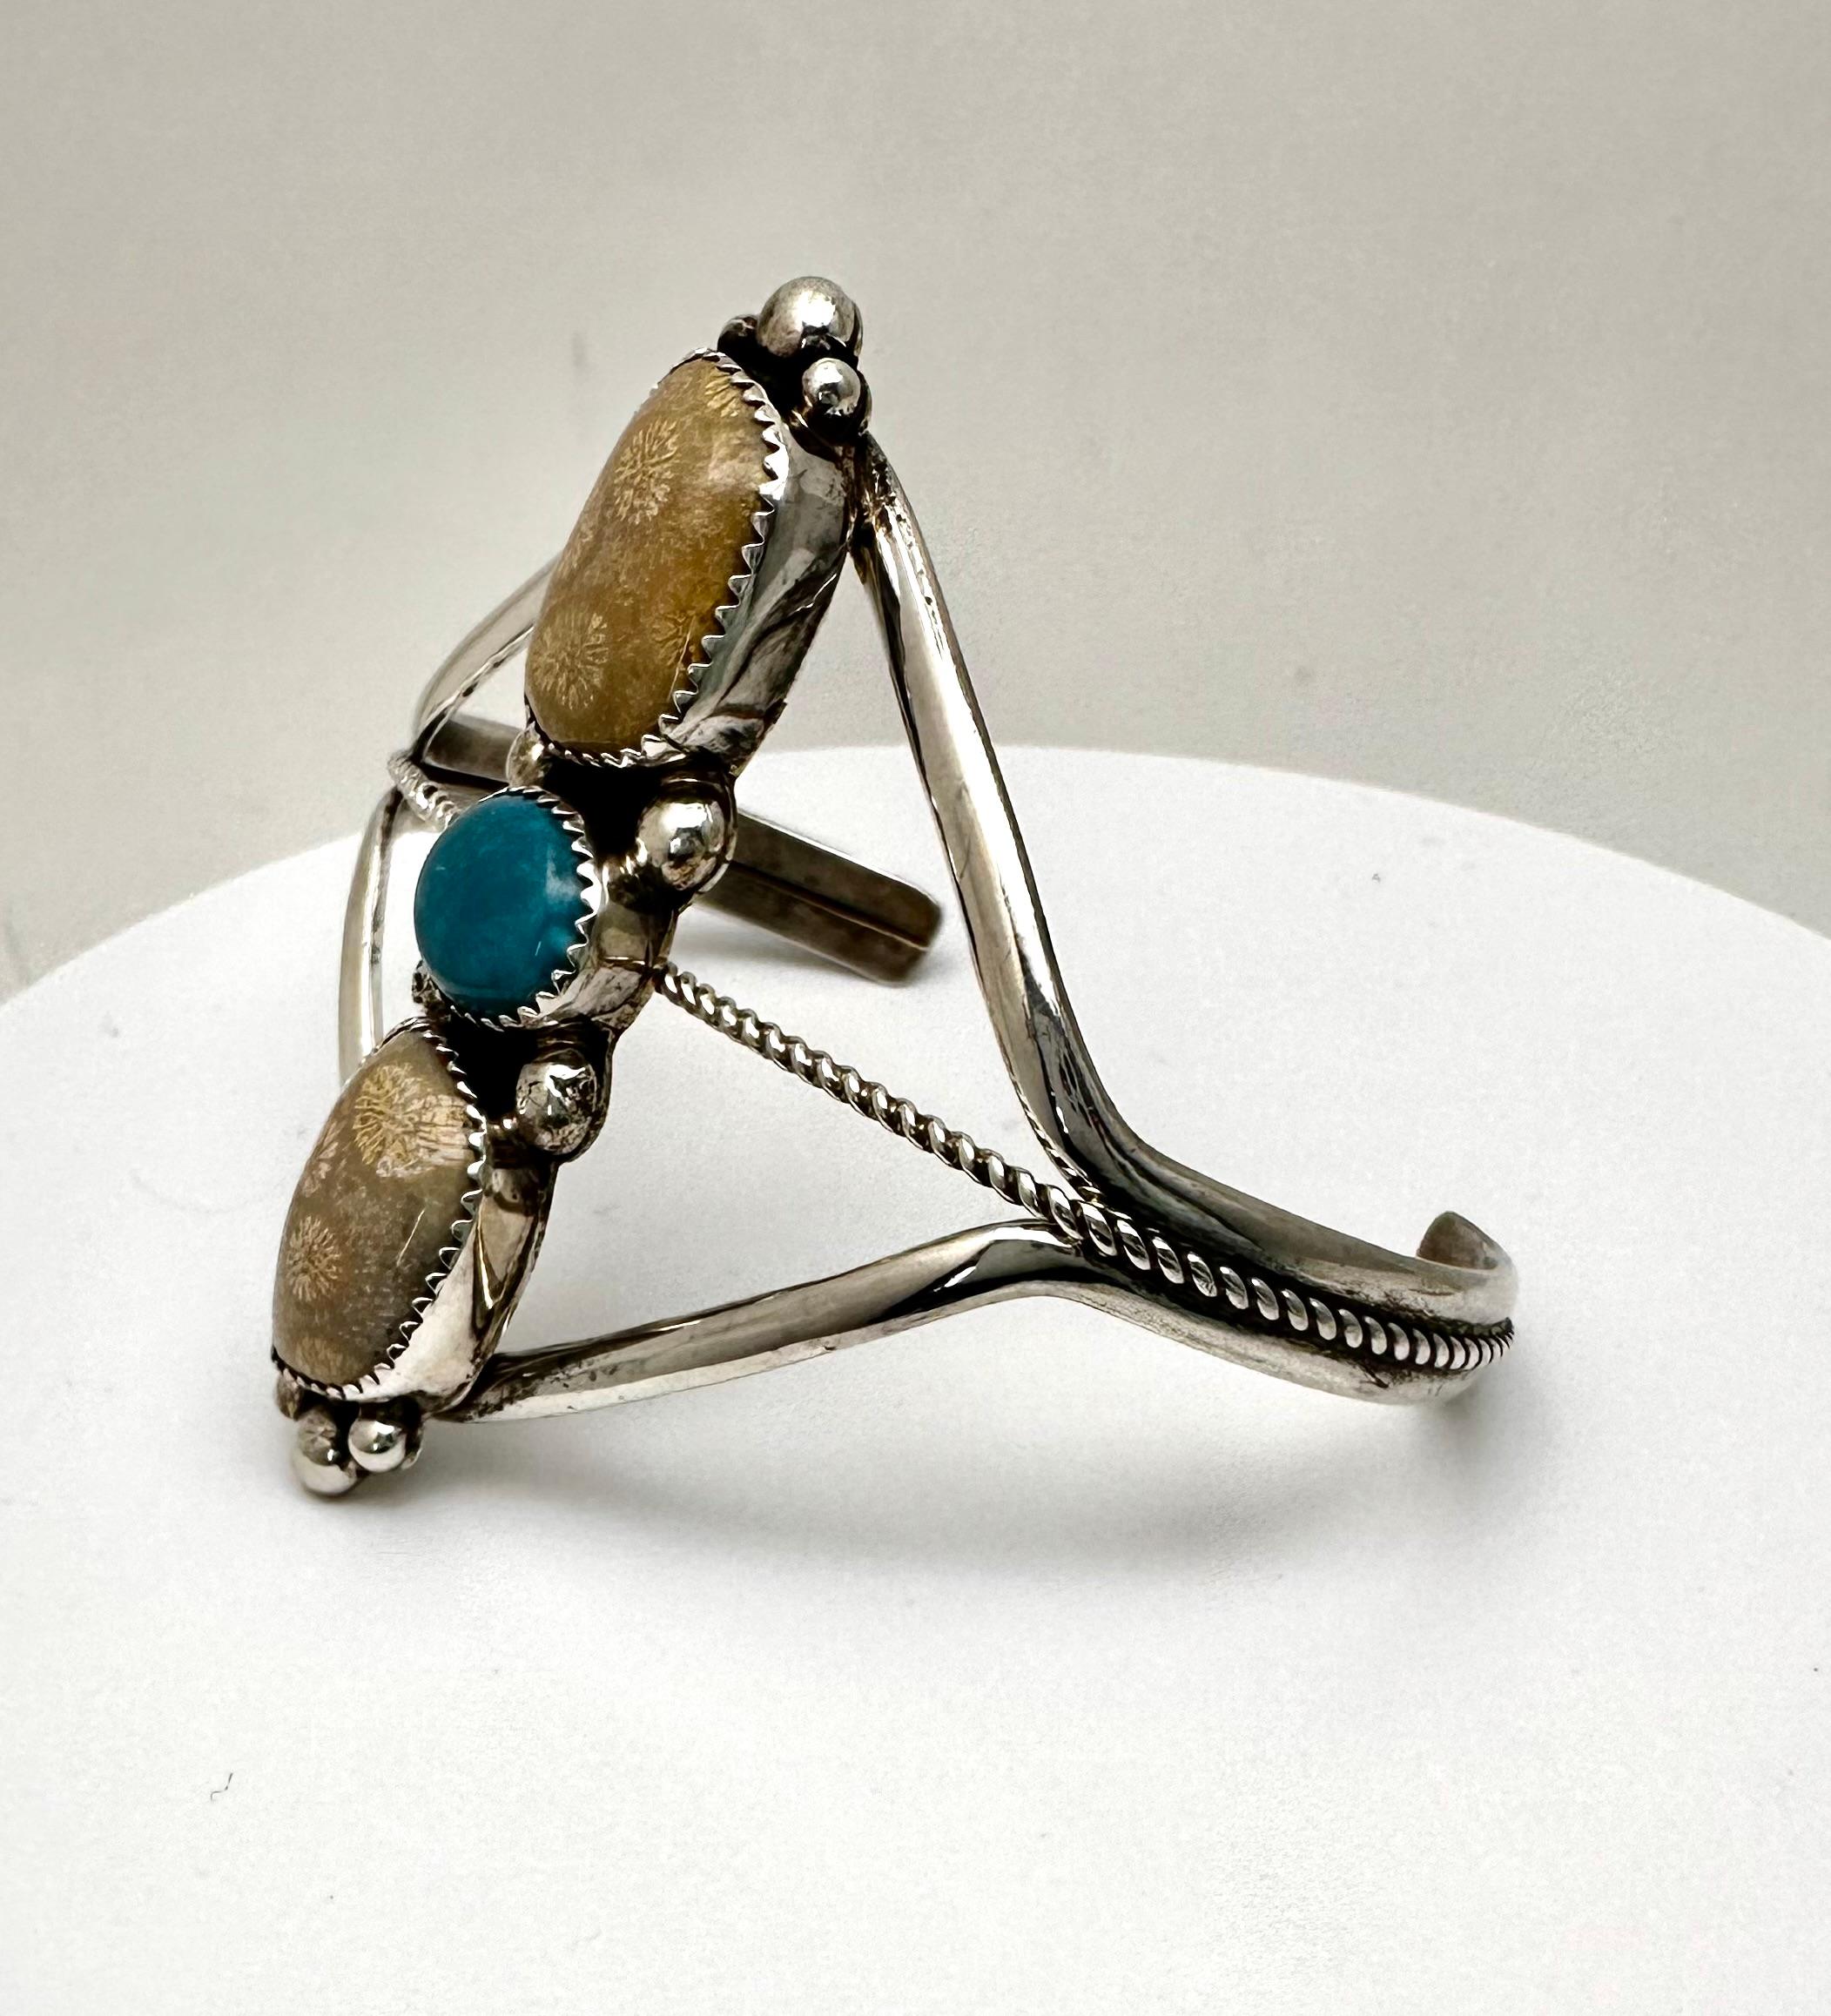 Cabochon Sterling Silver Turquoise Cuff Bracelet By Navajo Artist Charles Johnson For Sale